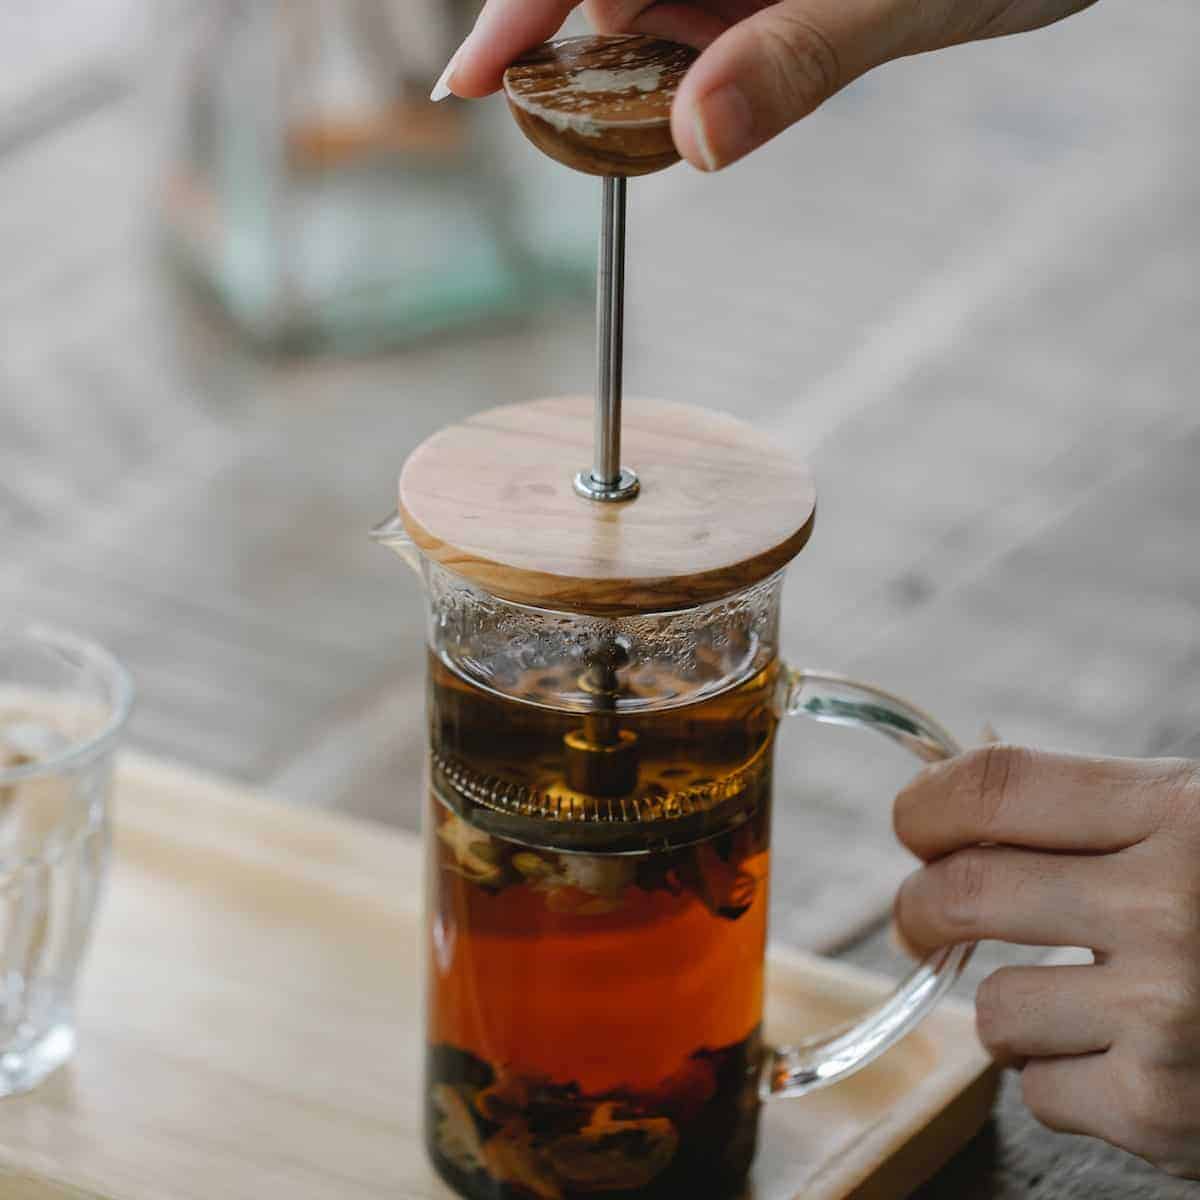 A woman using a press plunger to extract tea leaves